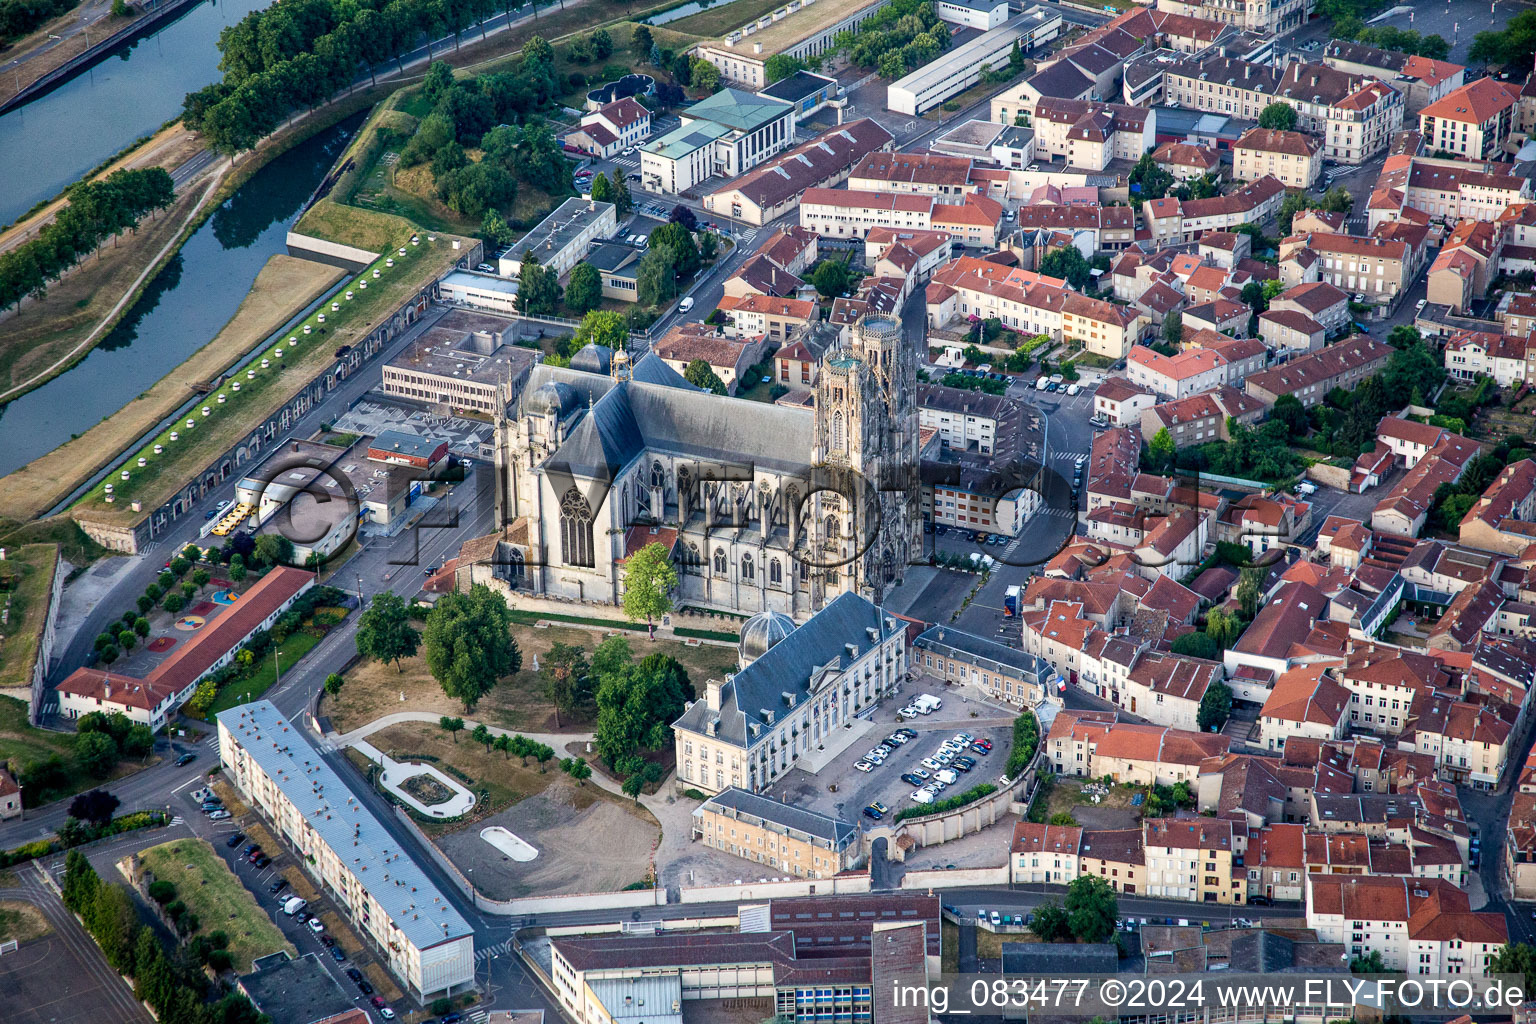 Church building of the cathedral of St. Stephen's in Toul in Grand Est, France